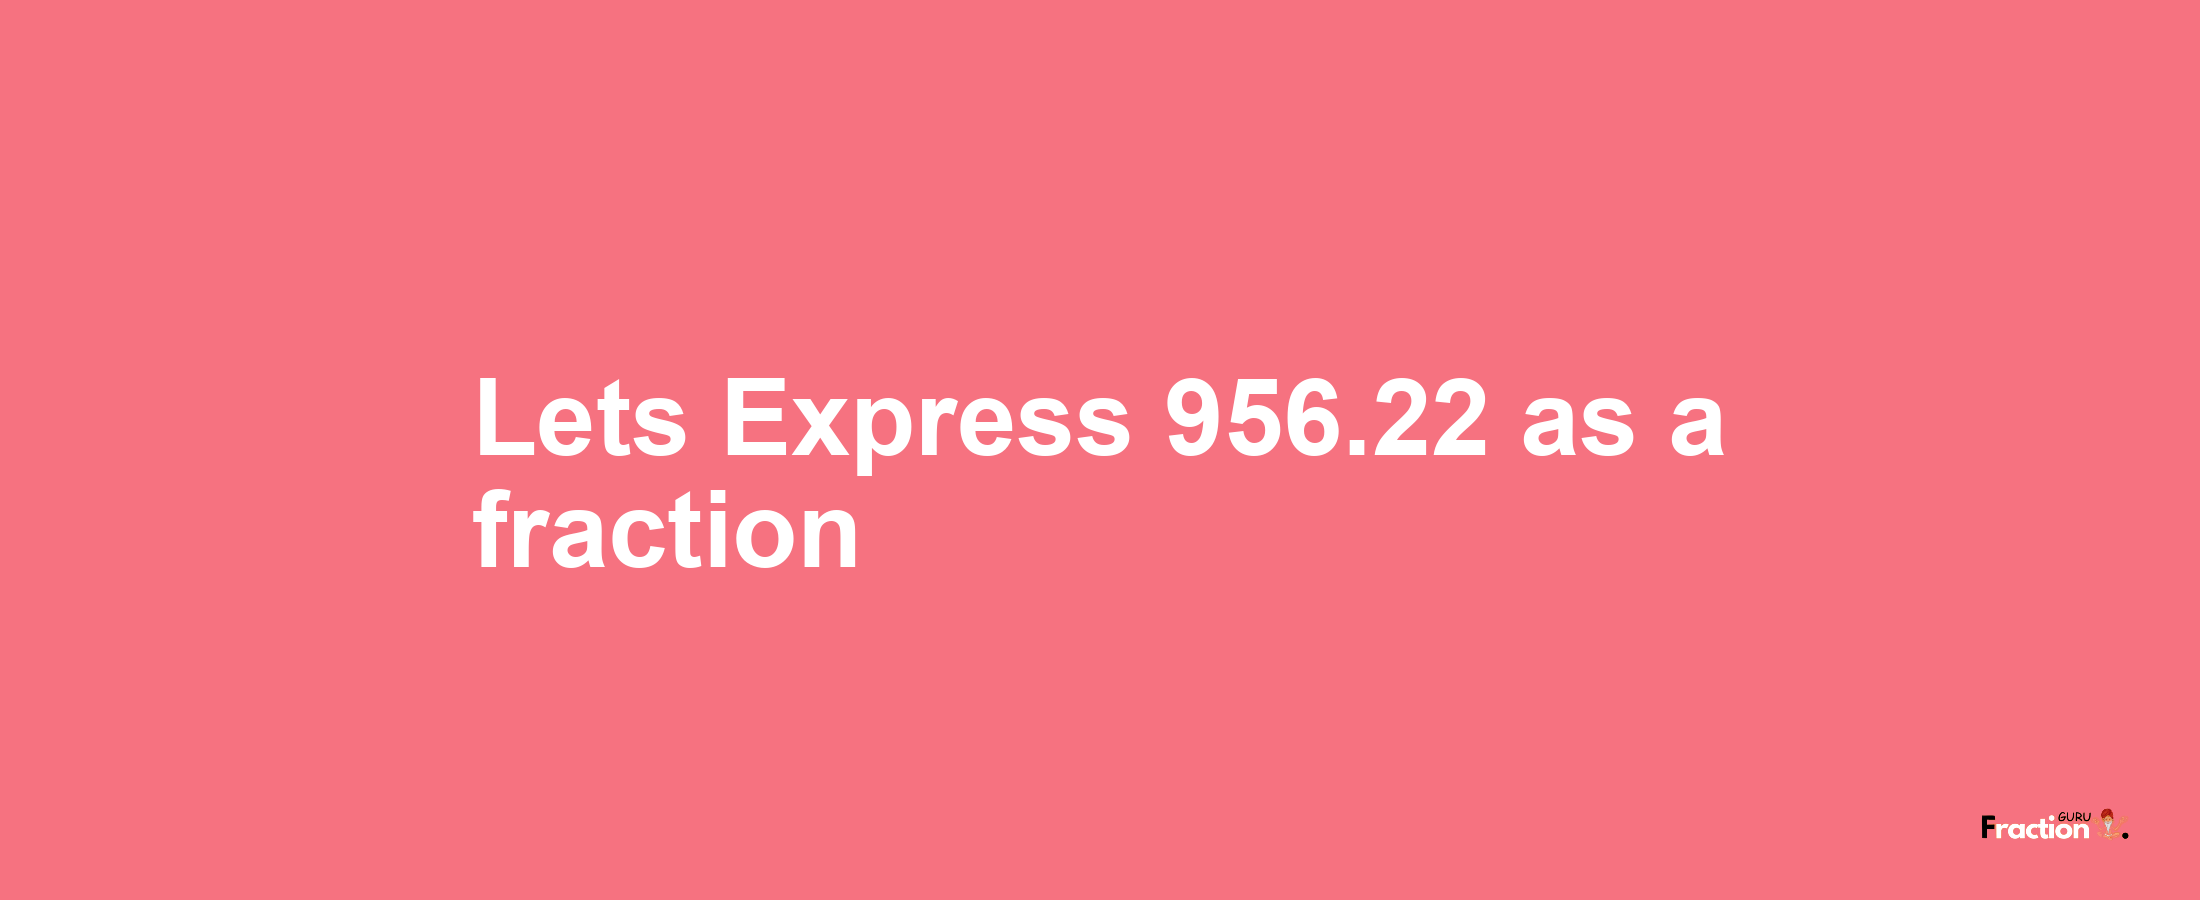 Lets Express 956.22 as afraction